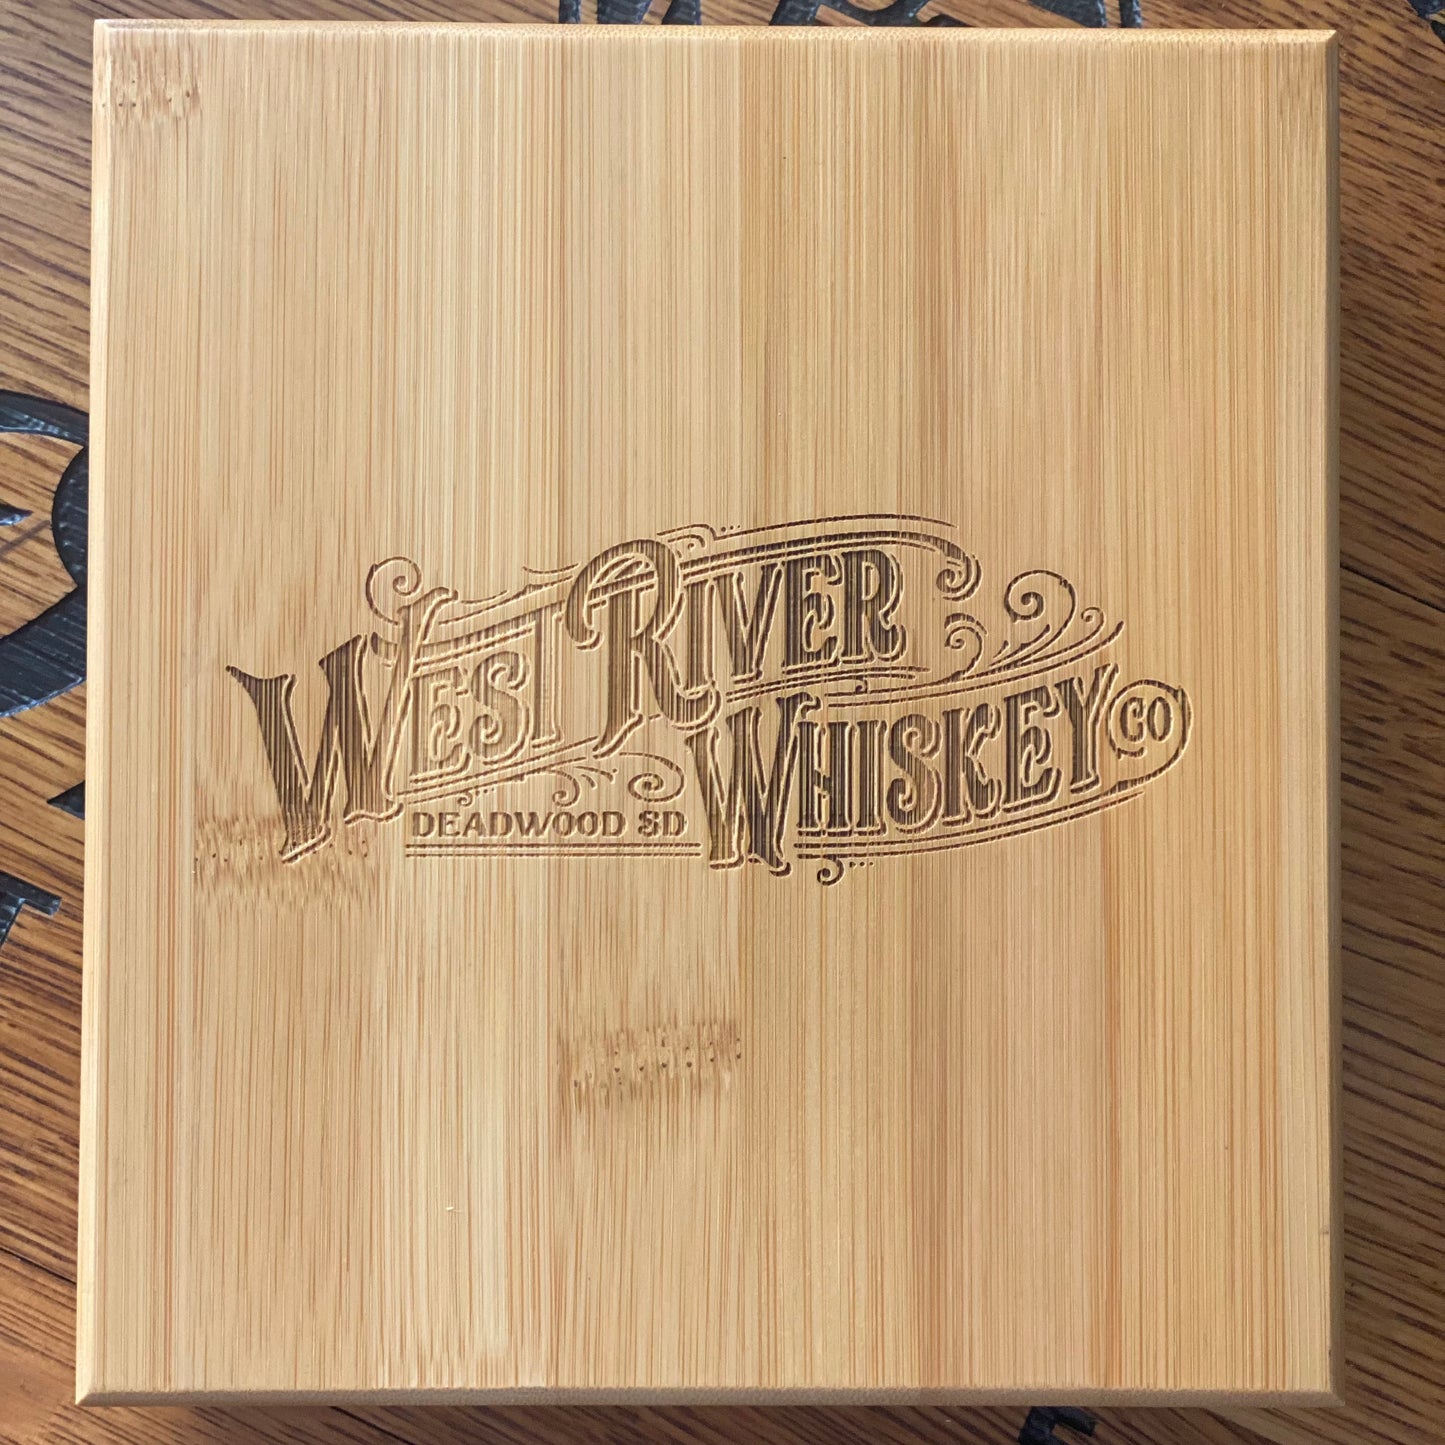 West River Whiskey Stainless Whiskey Stones